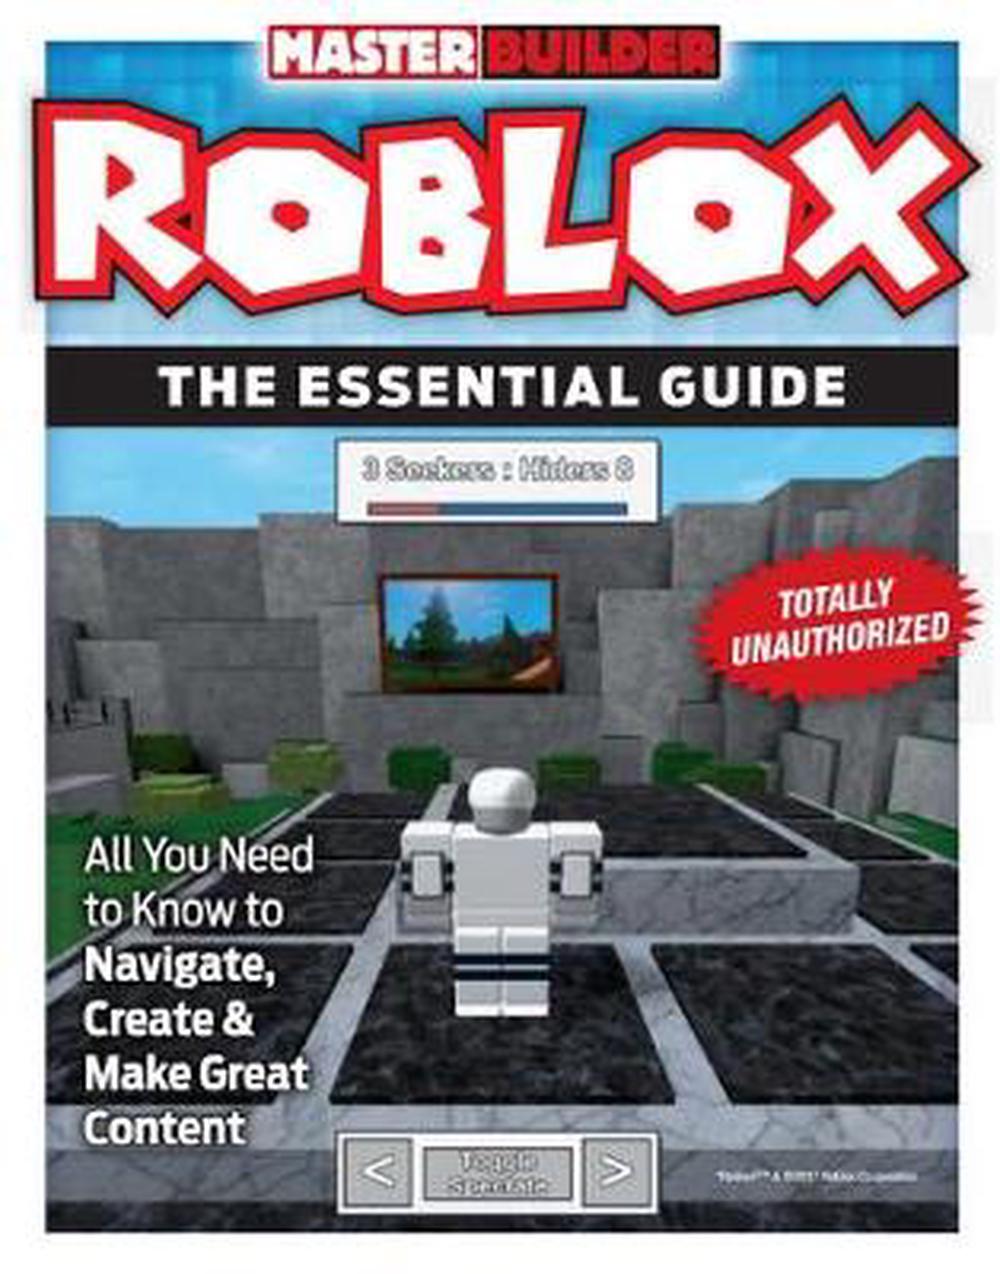 Master Builder Roblox By Triumph Books Paperback 9781629375151